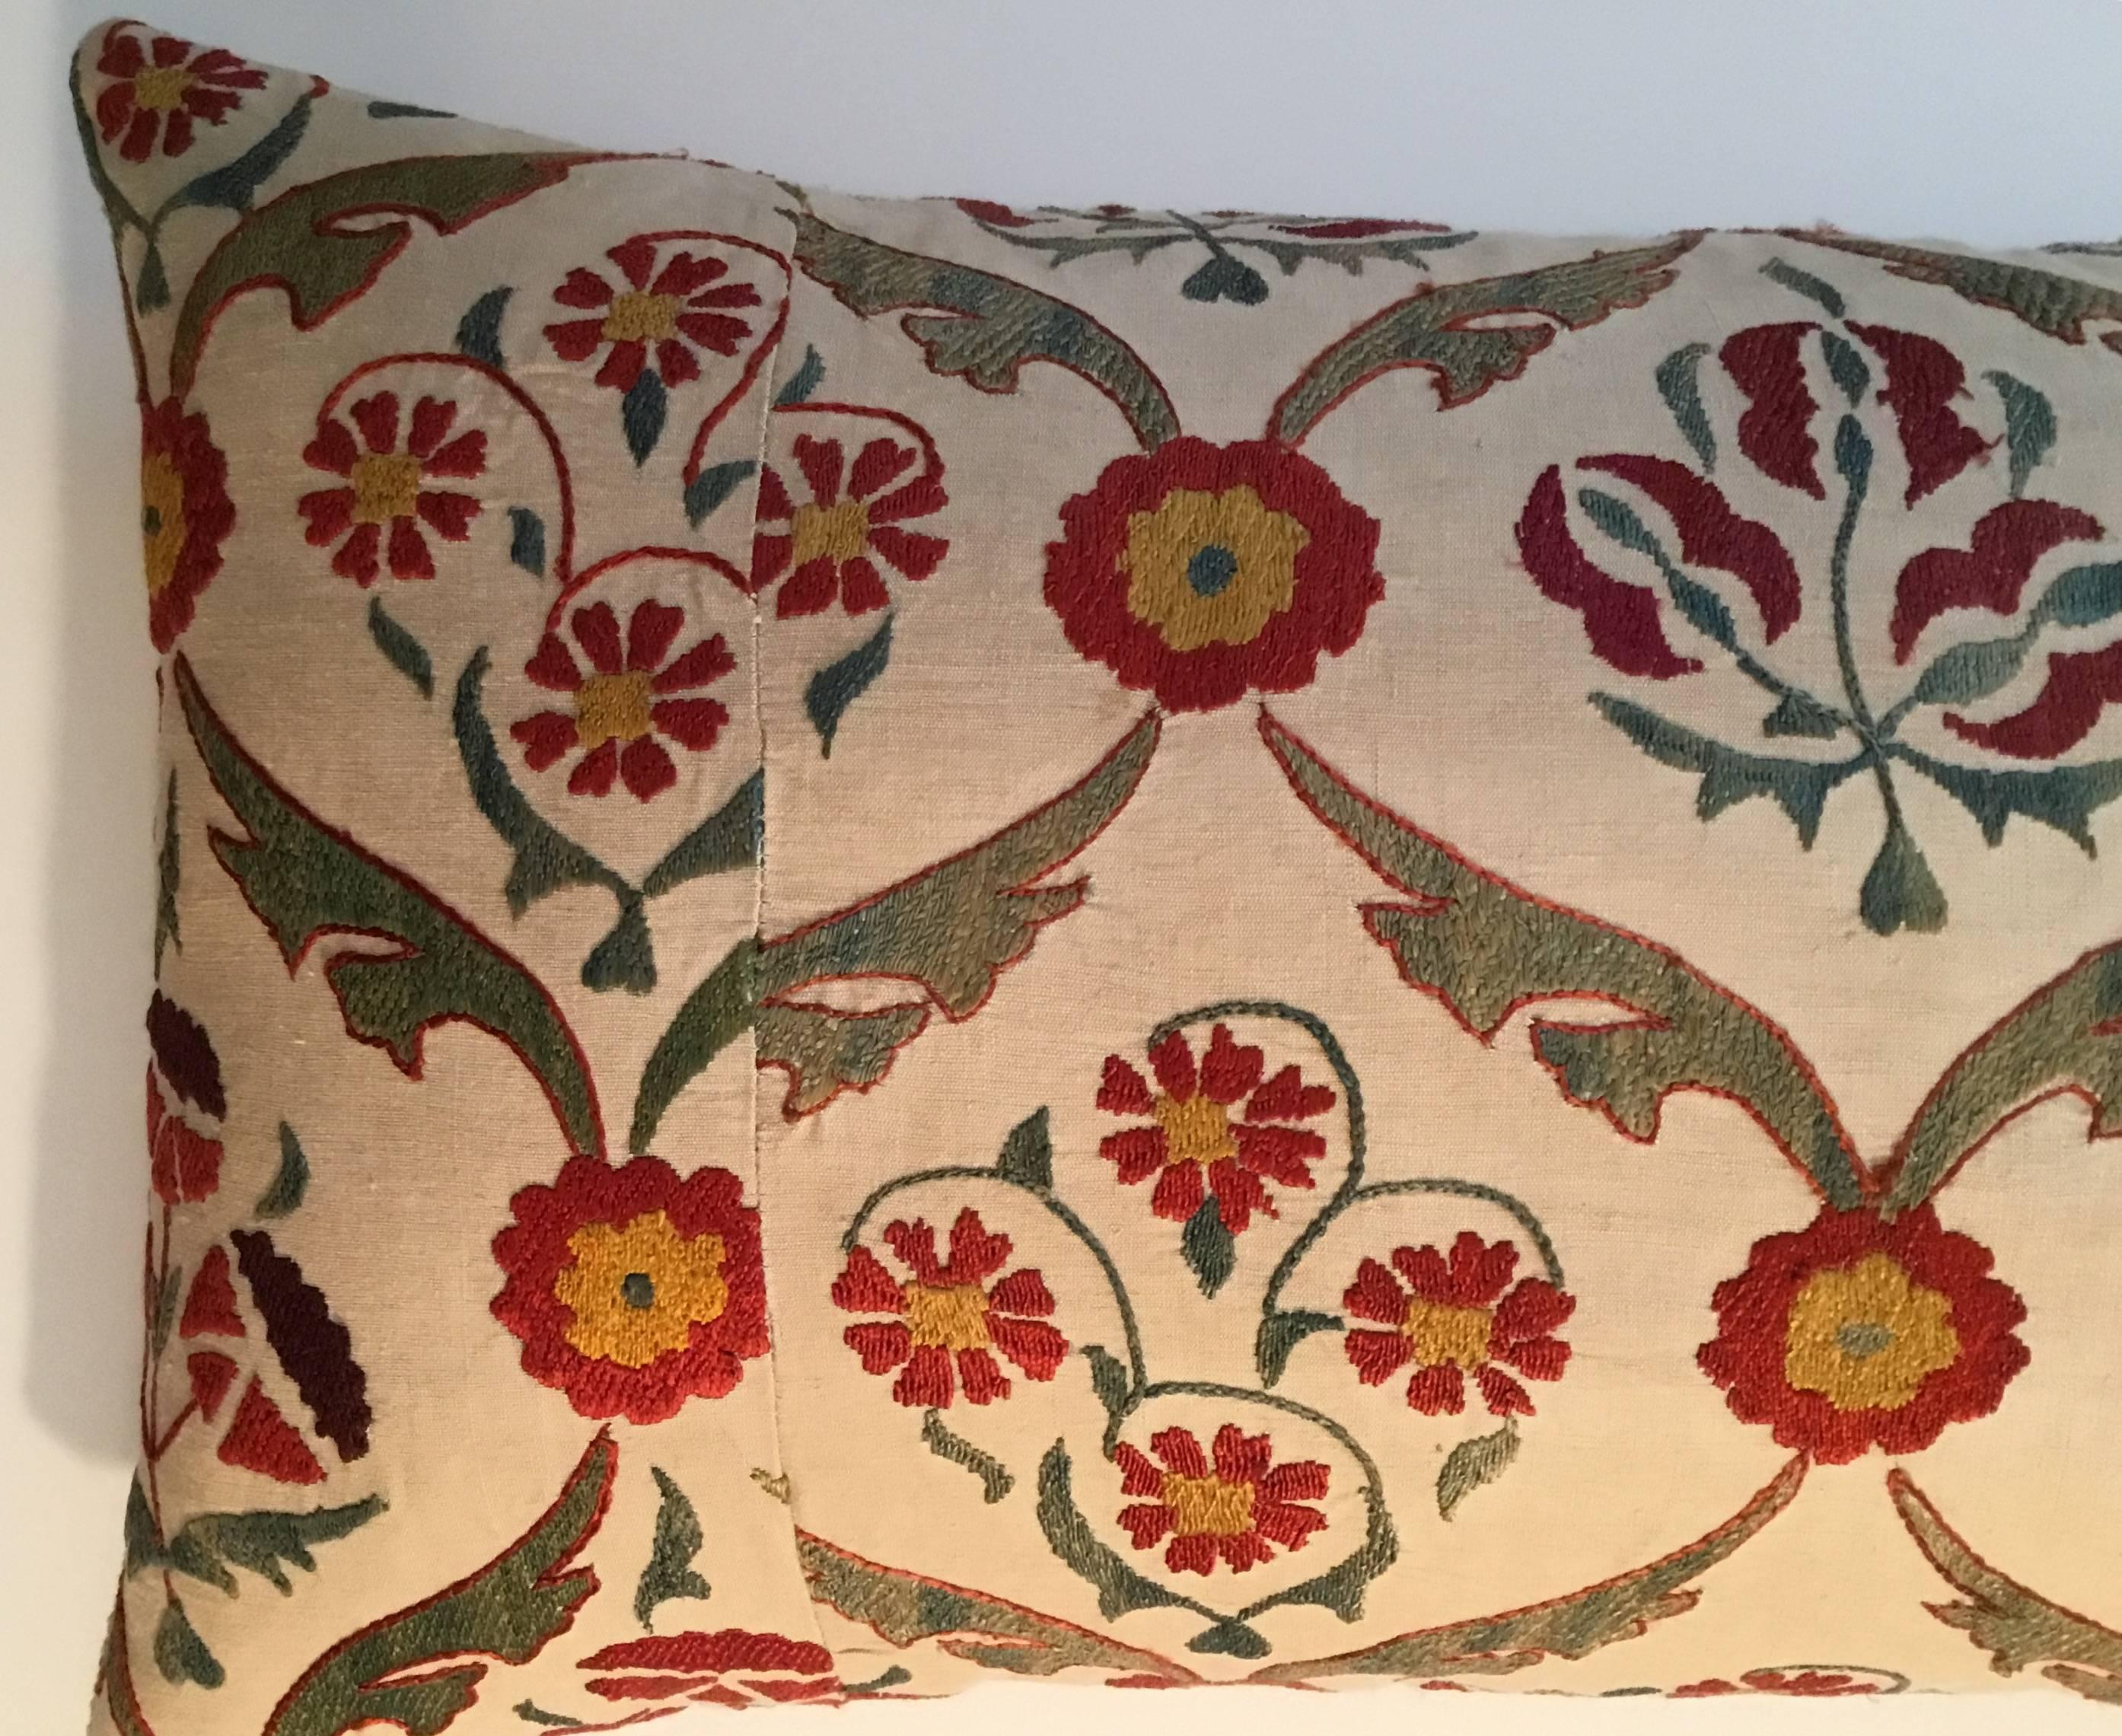 Beautiful pillow made silk hand embroidery Suzani fragment, very intricate motifs of vine and flowers on a cream background.
Frash down and feather insert, fine antique linen backing.
   